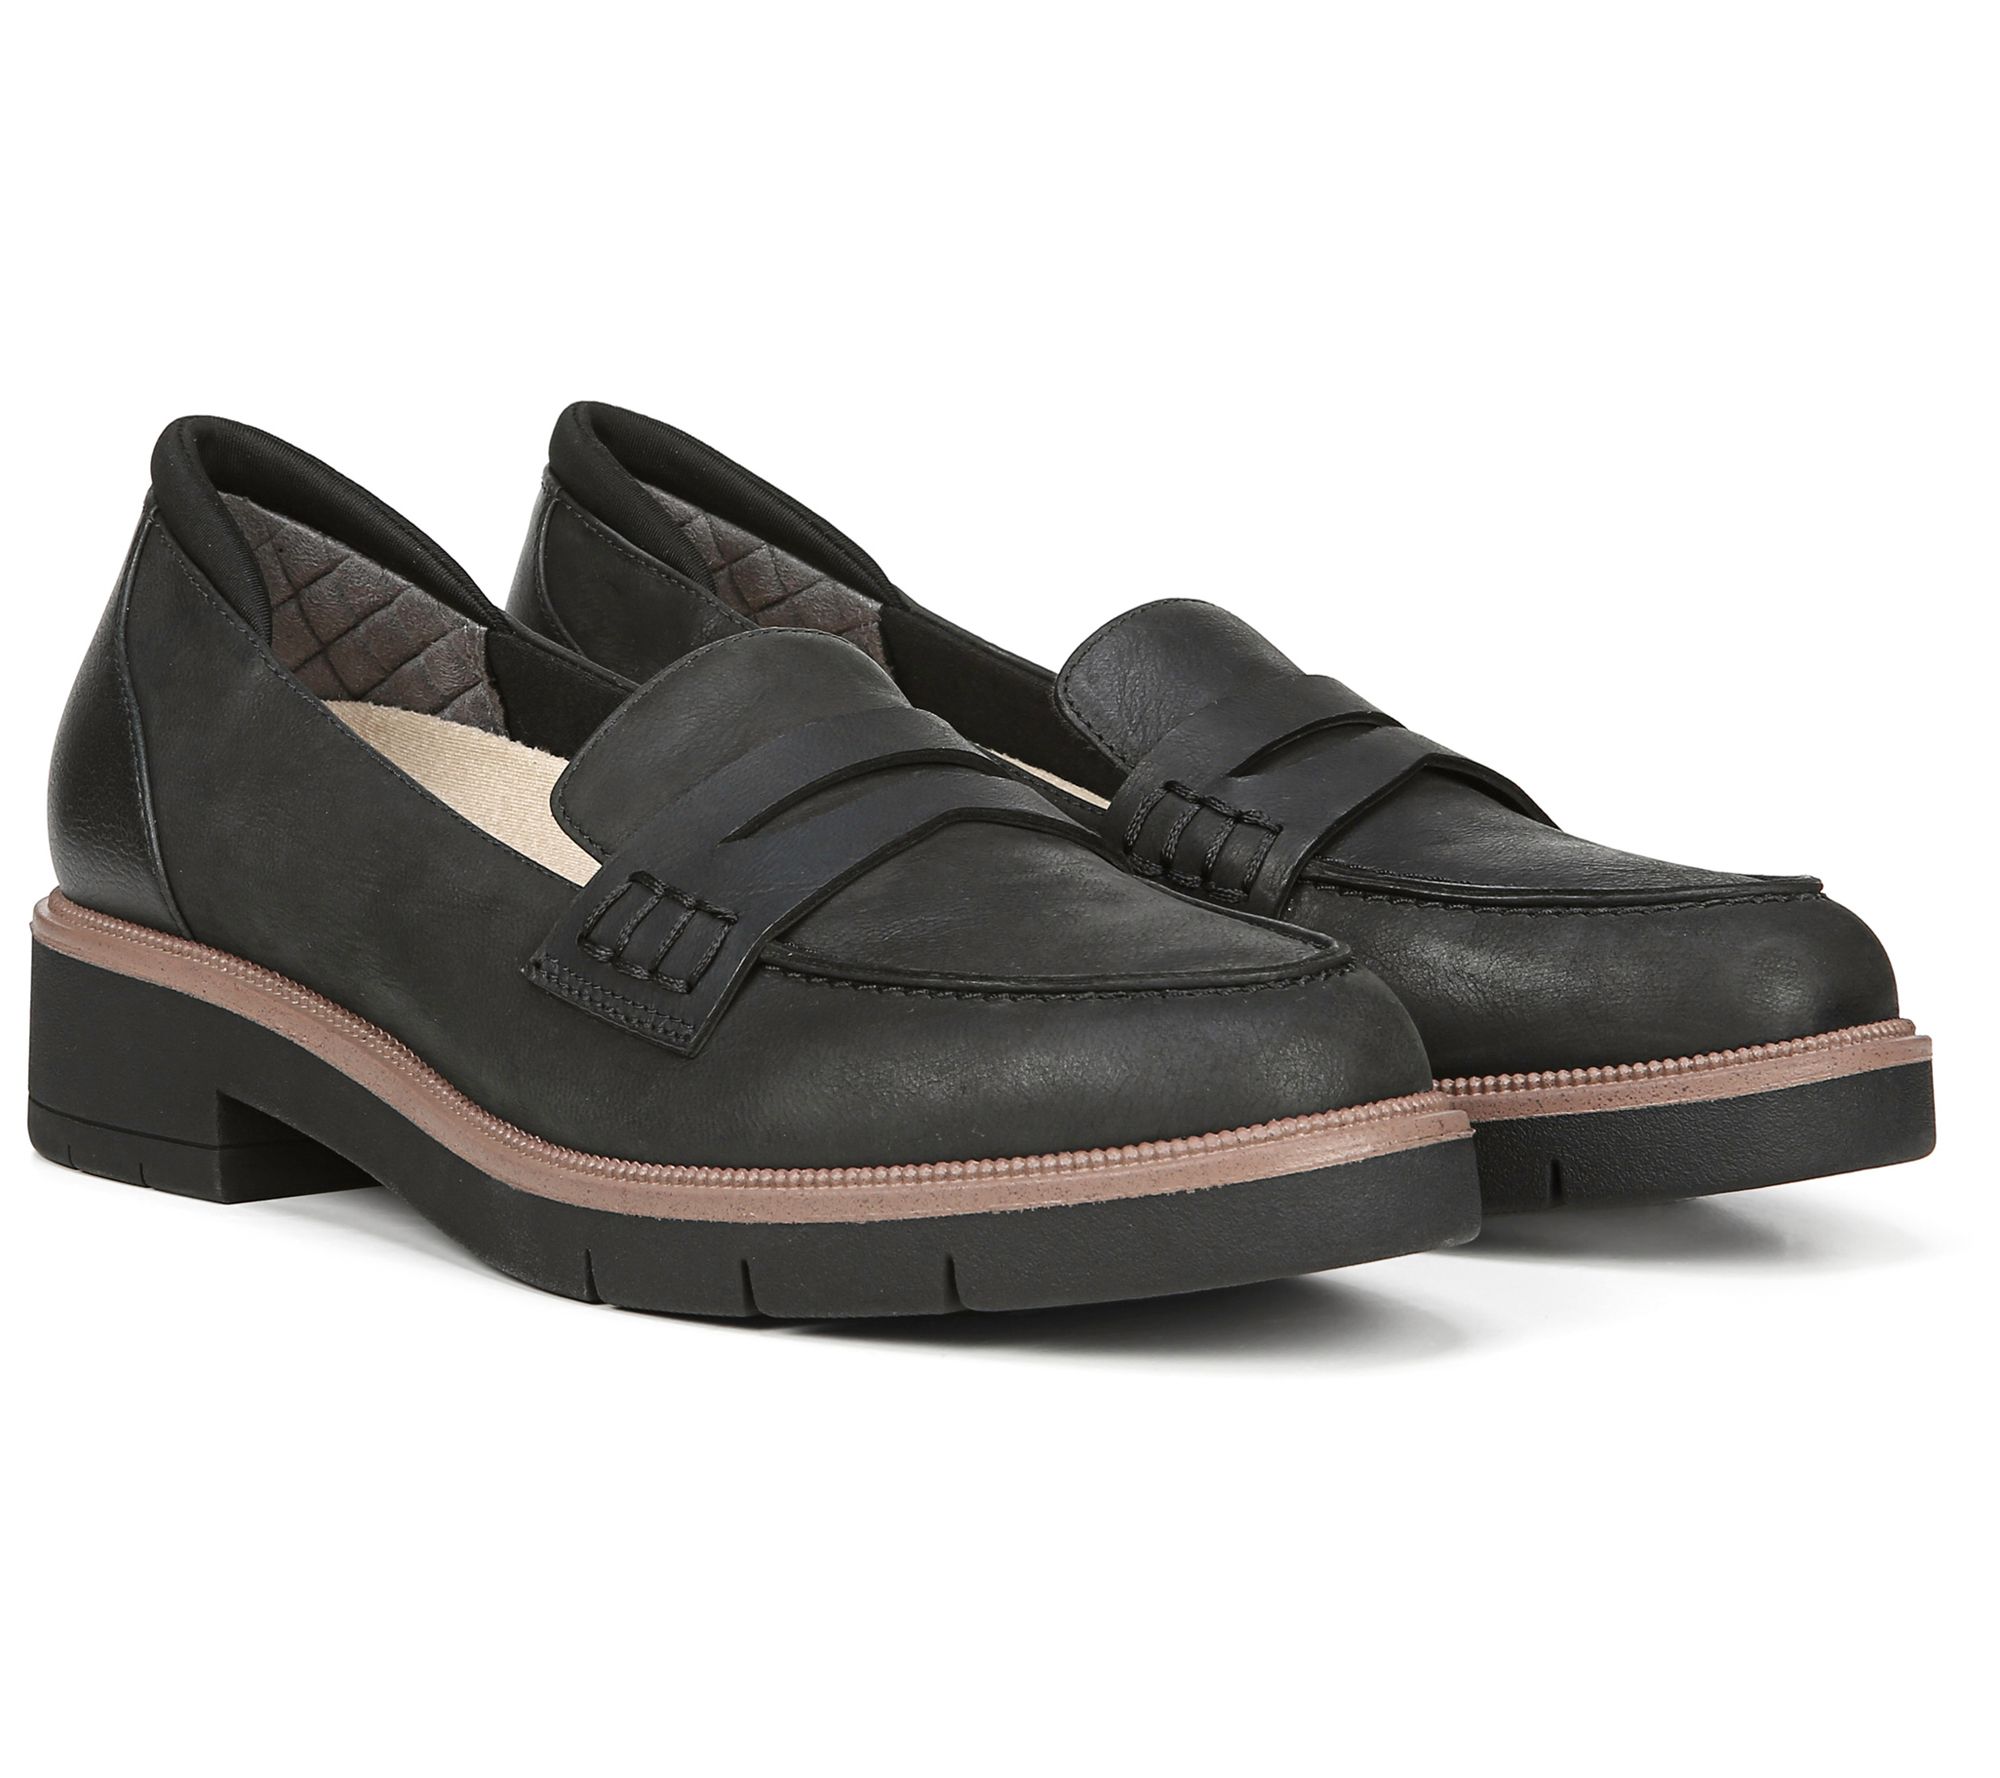 Dr. Scholl's Lug Sole Slip-On Loafers - Generation - QVC.com